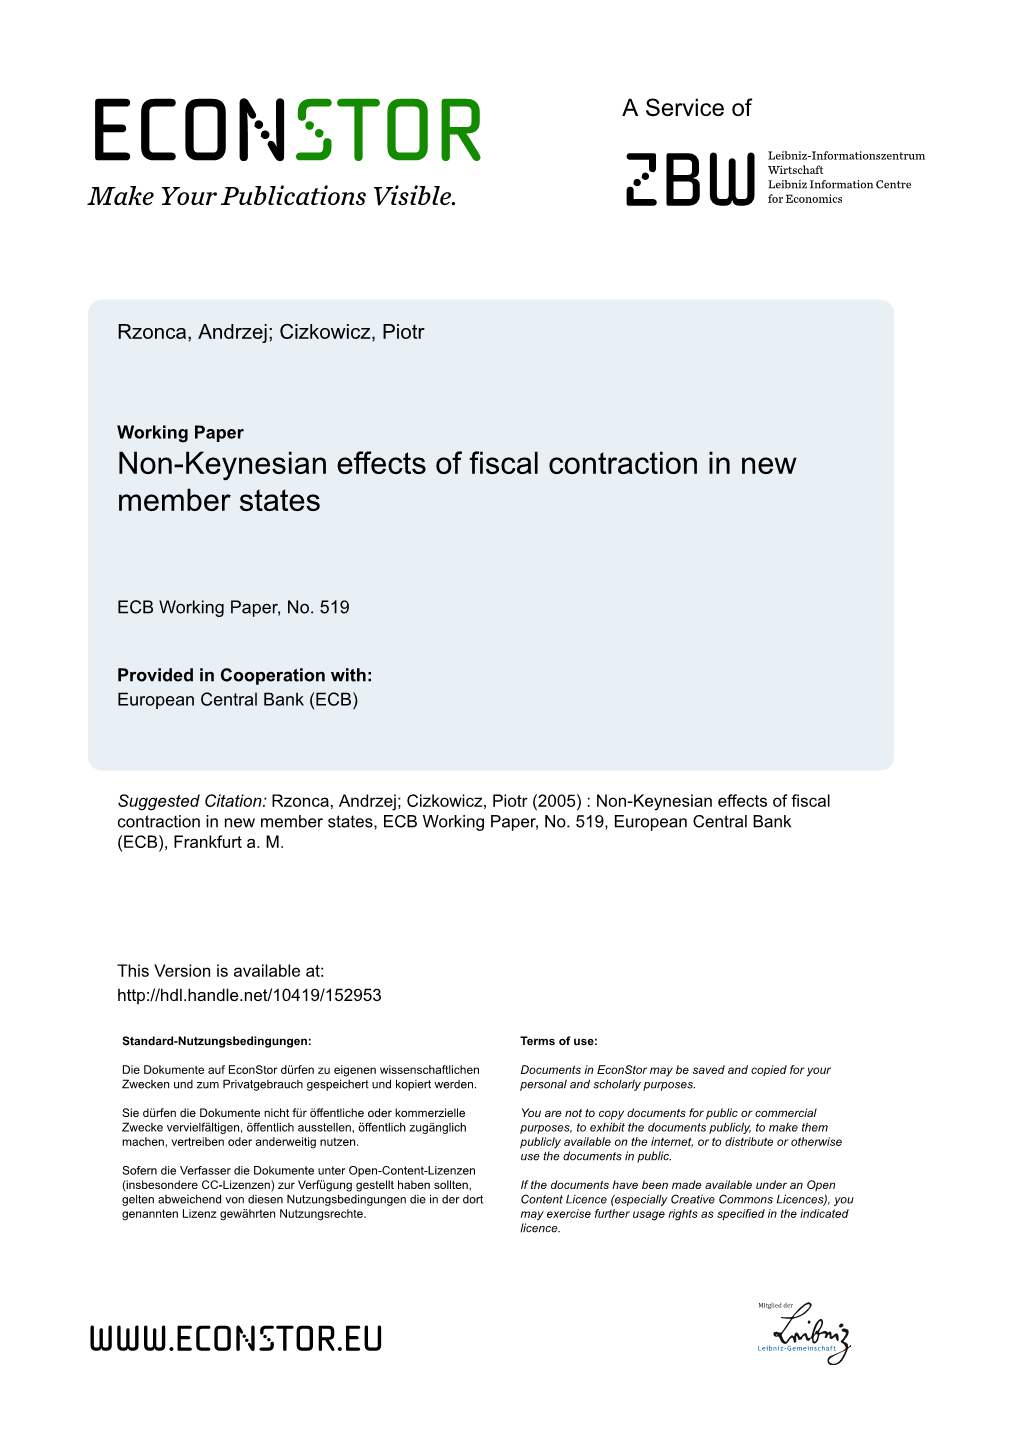 Non-Keynesian Effects of Fiscal Contraction in New Member States